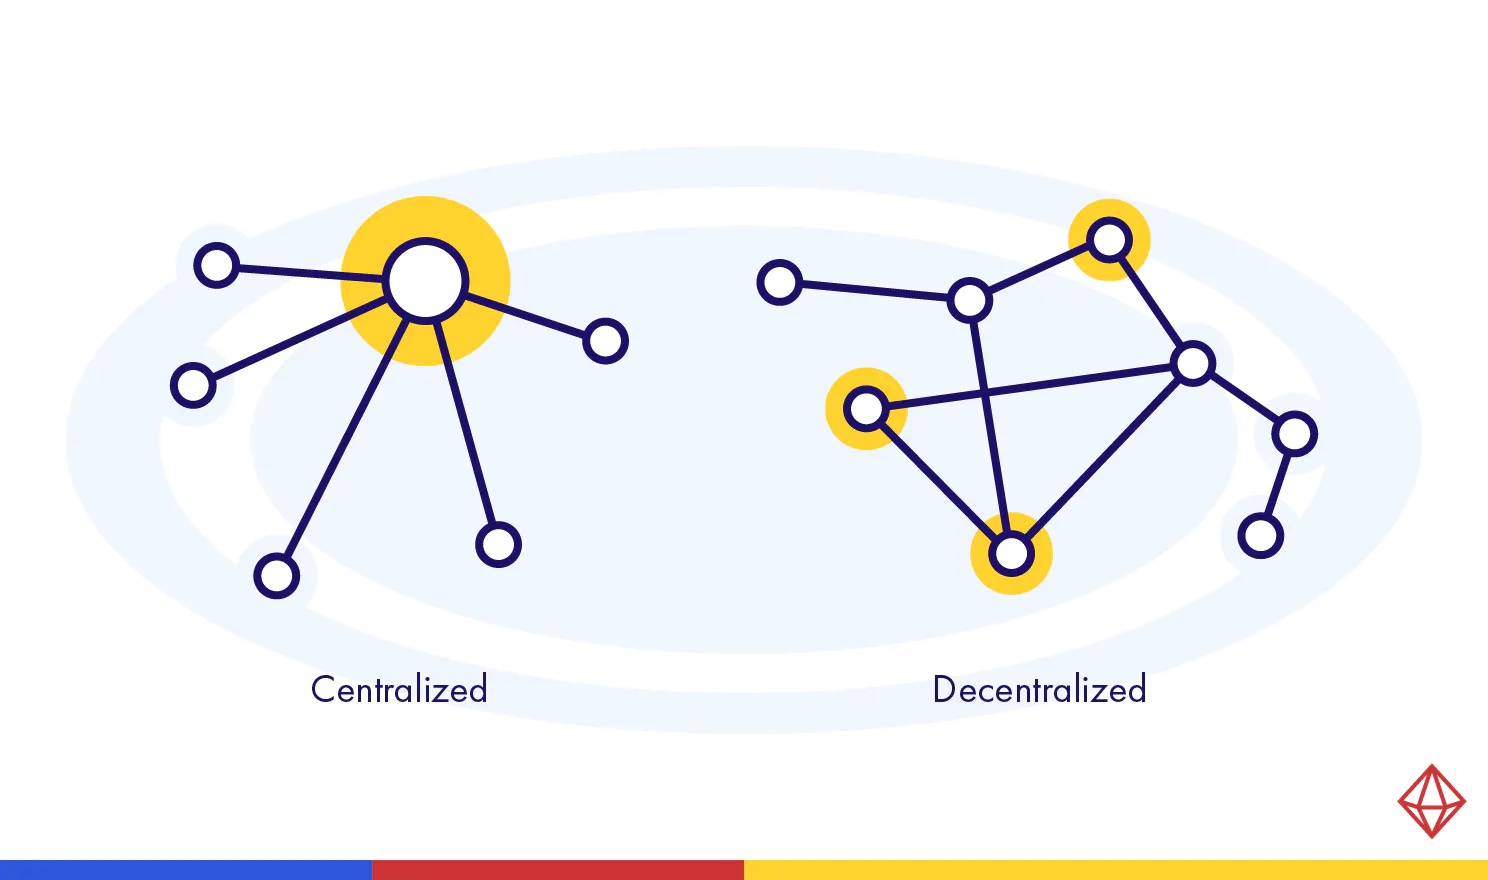 Centralized vs Decentralized Networking